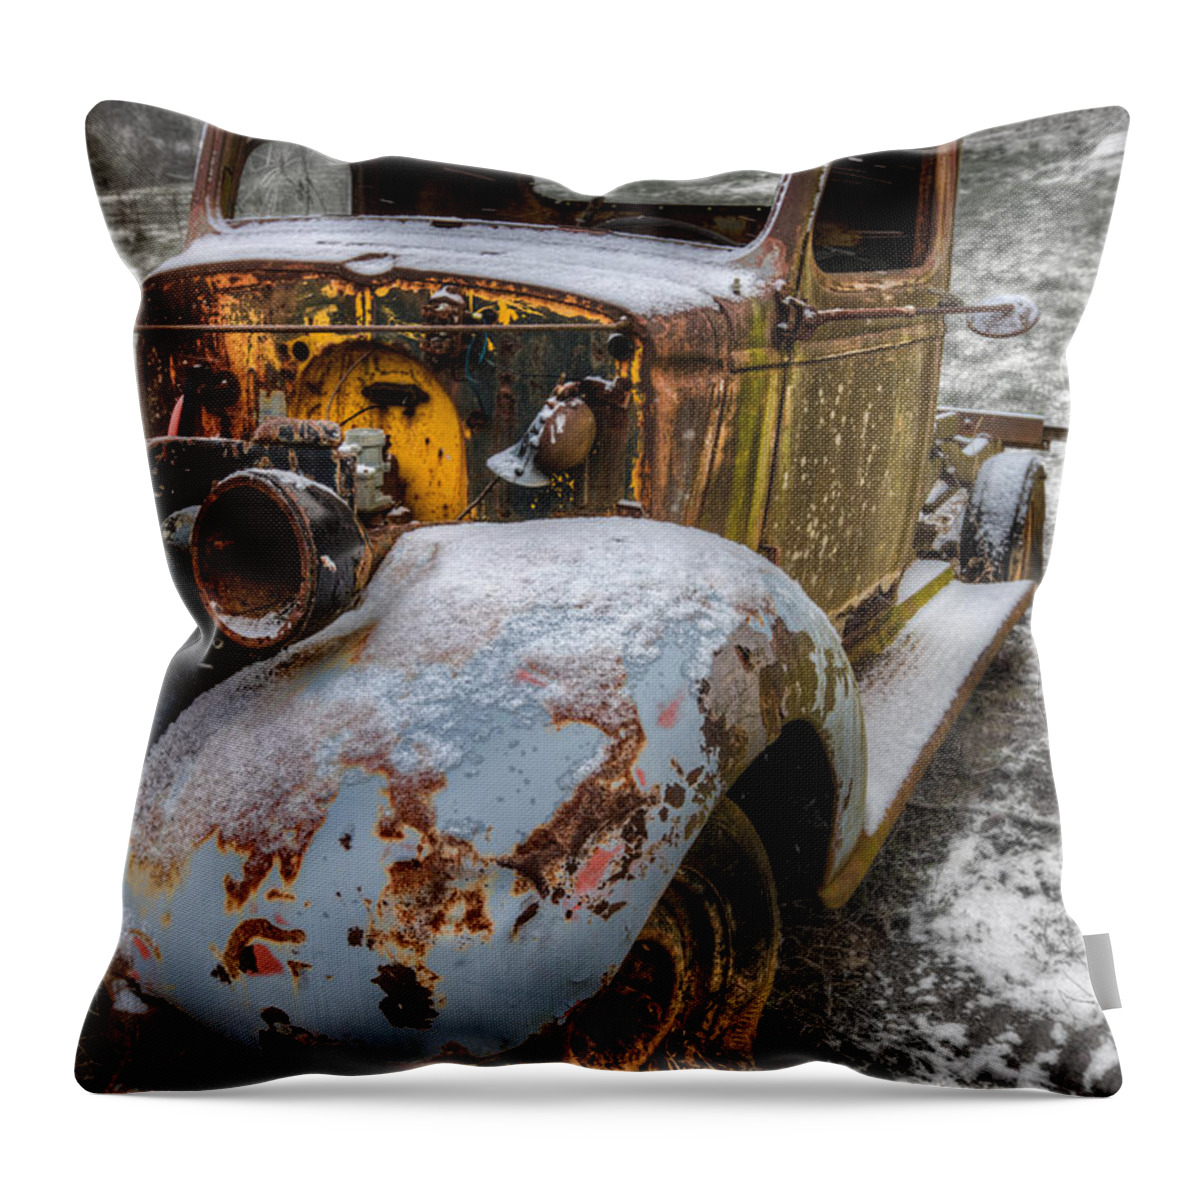 1940 Throw Pillow featuring the photograph Plymouth Truck by Debra and Dave Vanderlaan